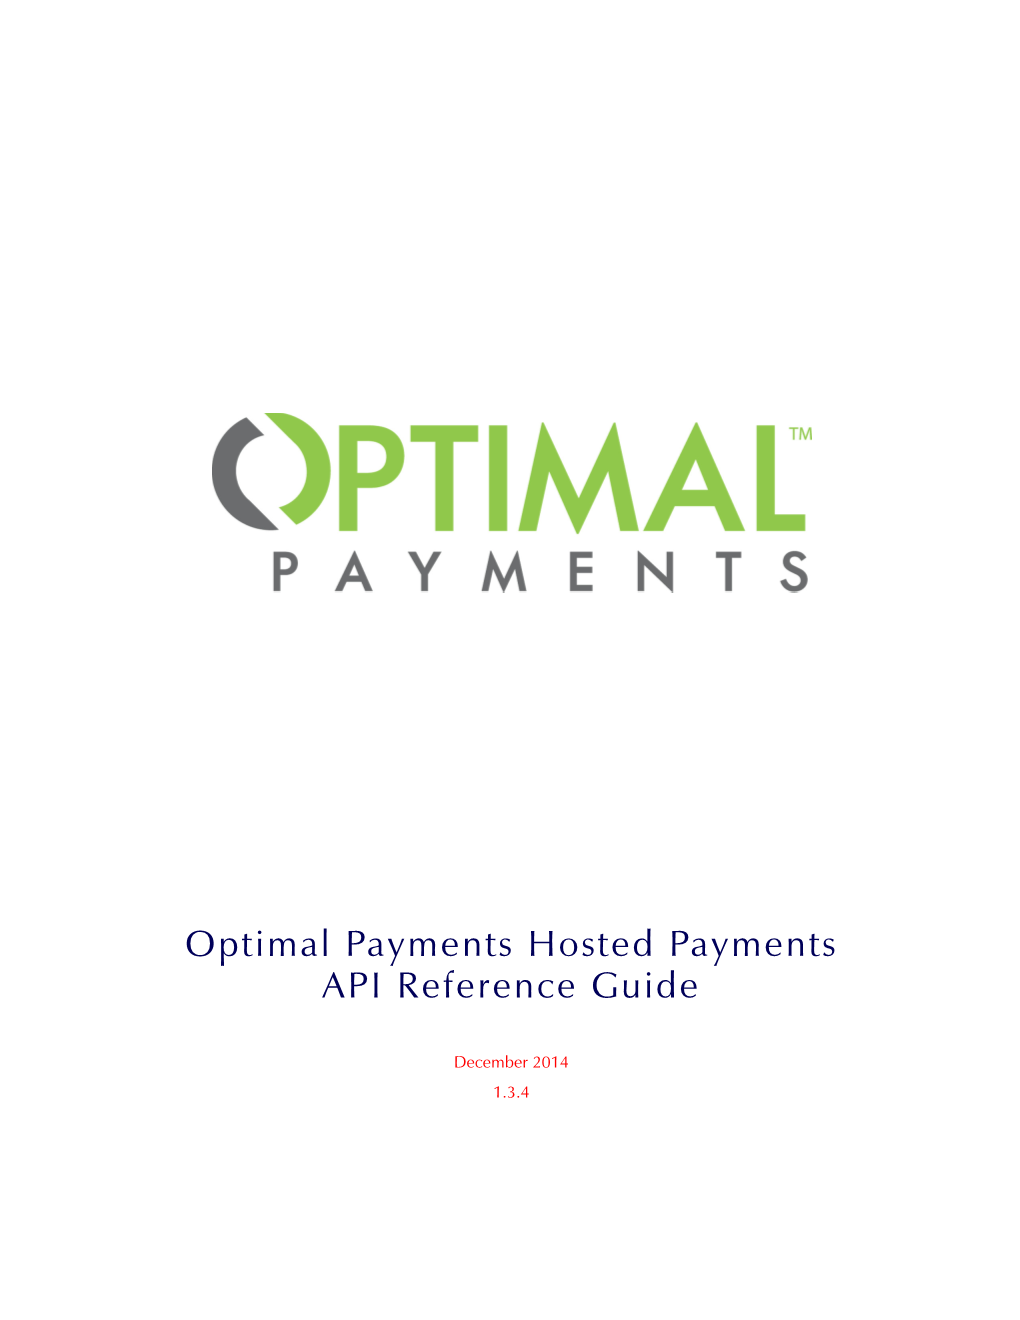 Optimal Payments Hosted Payments API Reference Guide